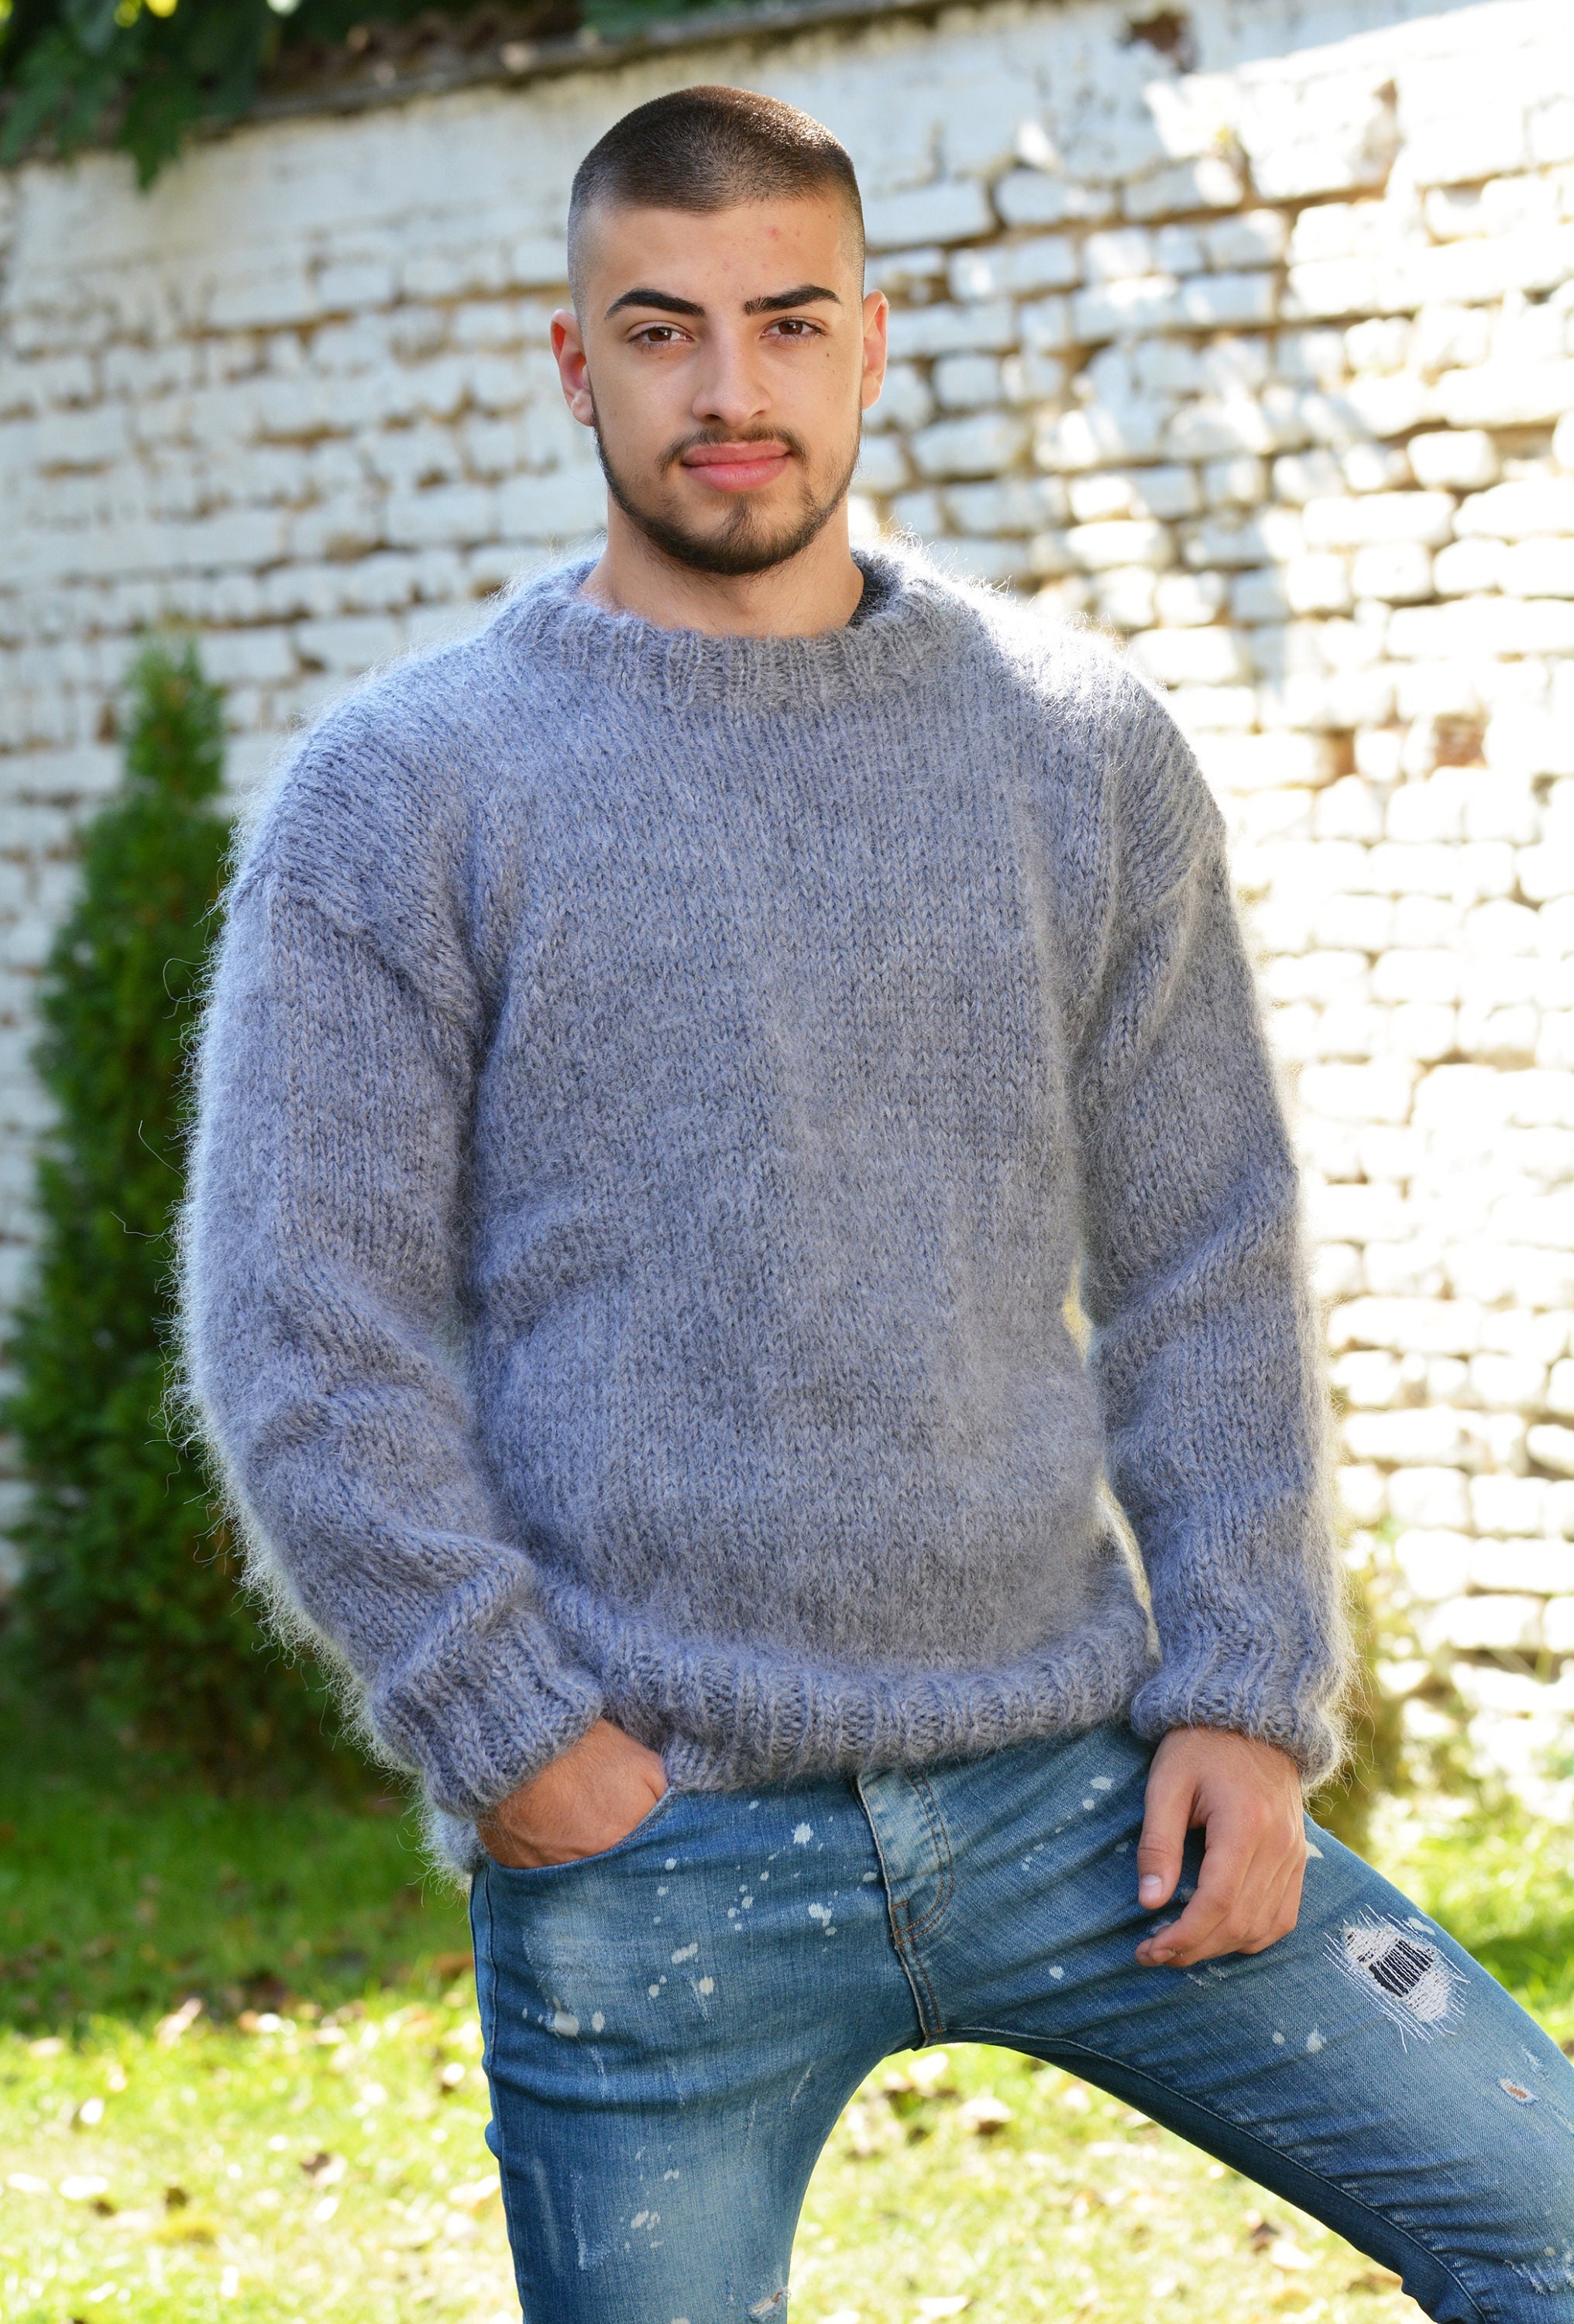 Designer Hand Knitted Wool Sweater, Crewneck Fuzzy Pullover